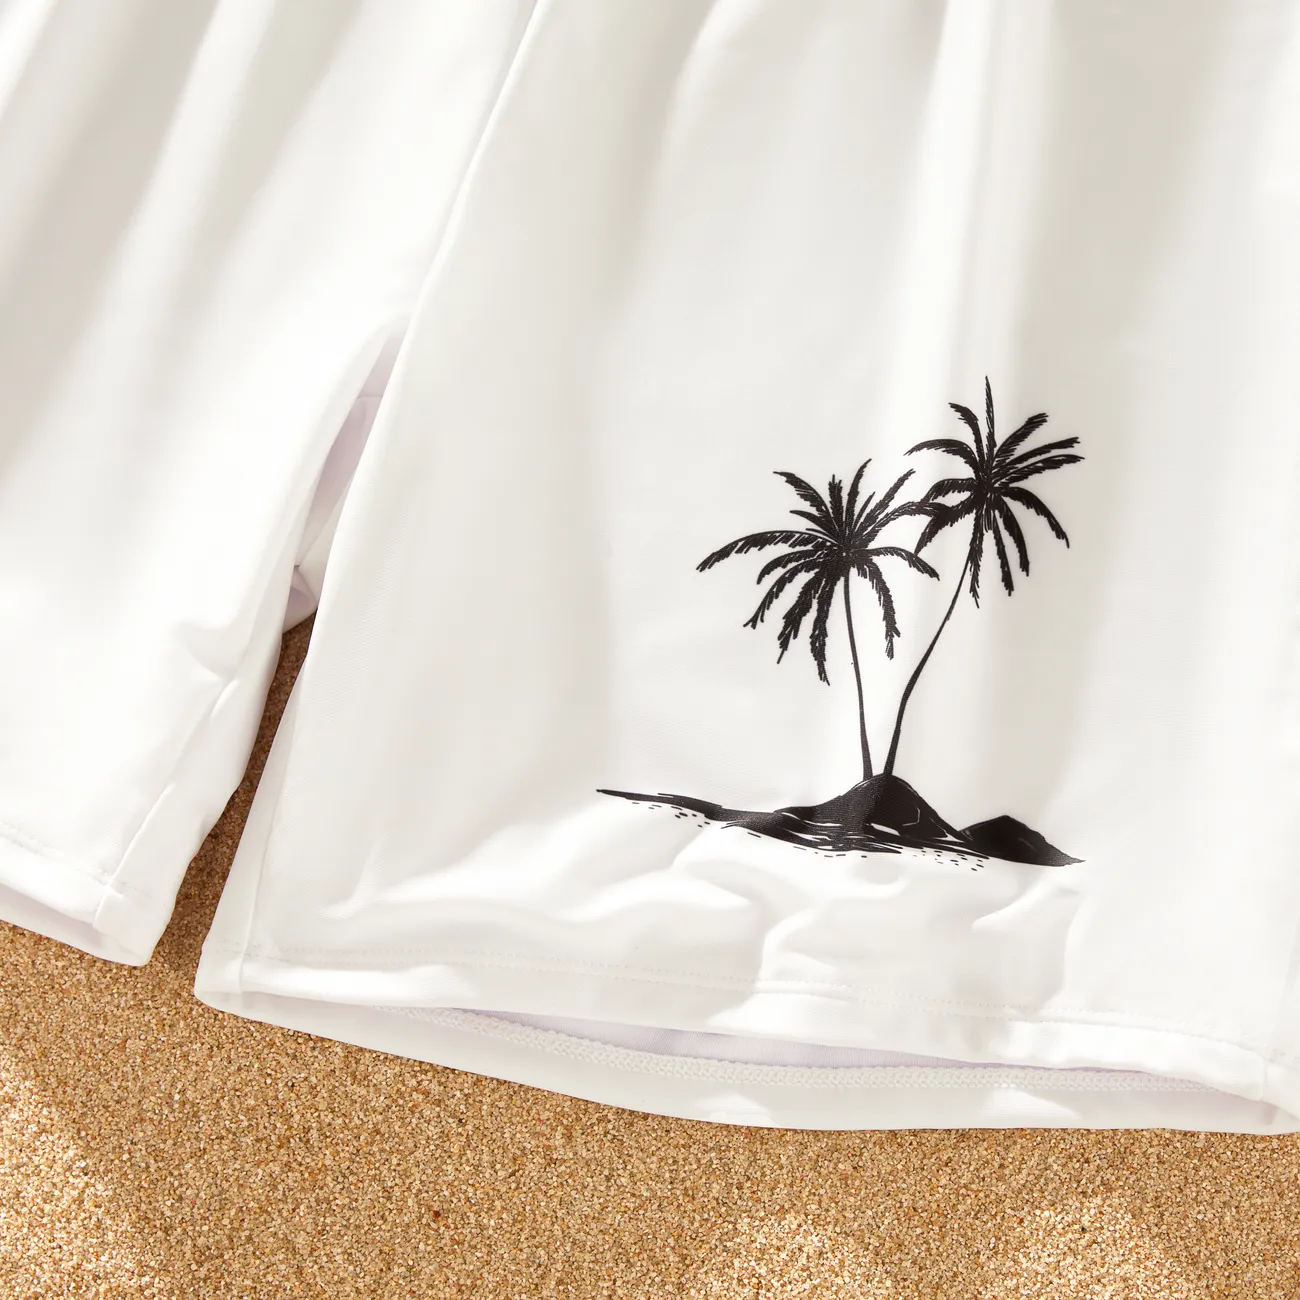 Family Matching Drawstring Swim Trunks or White Bow Accent Eyelet Strap One-Piece Swimsuit  White big image 1